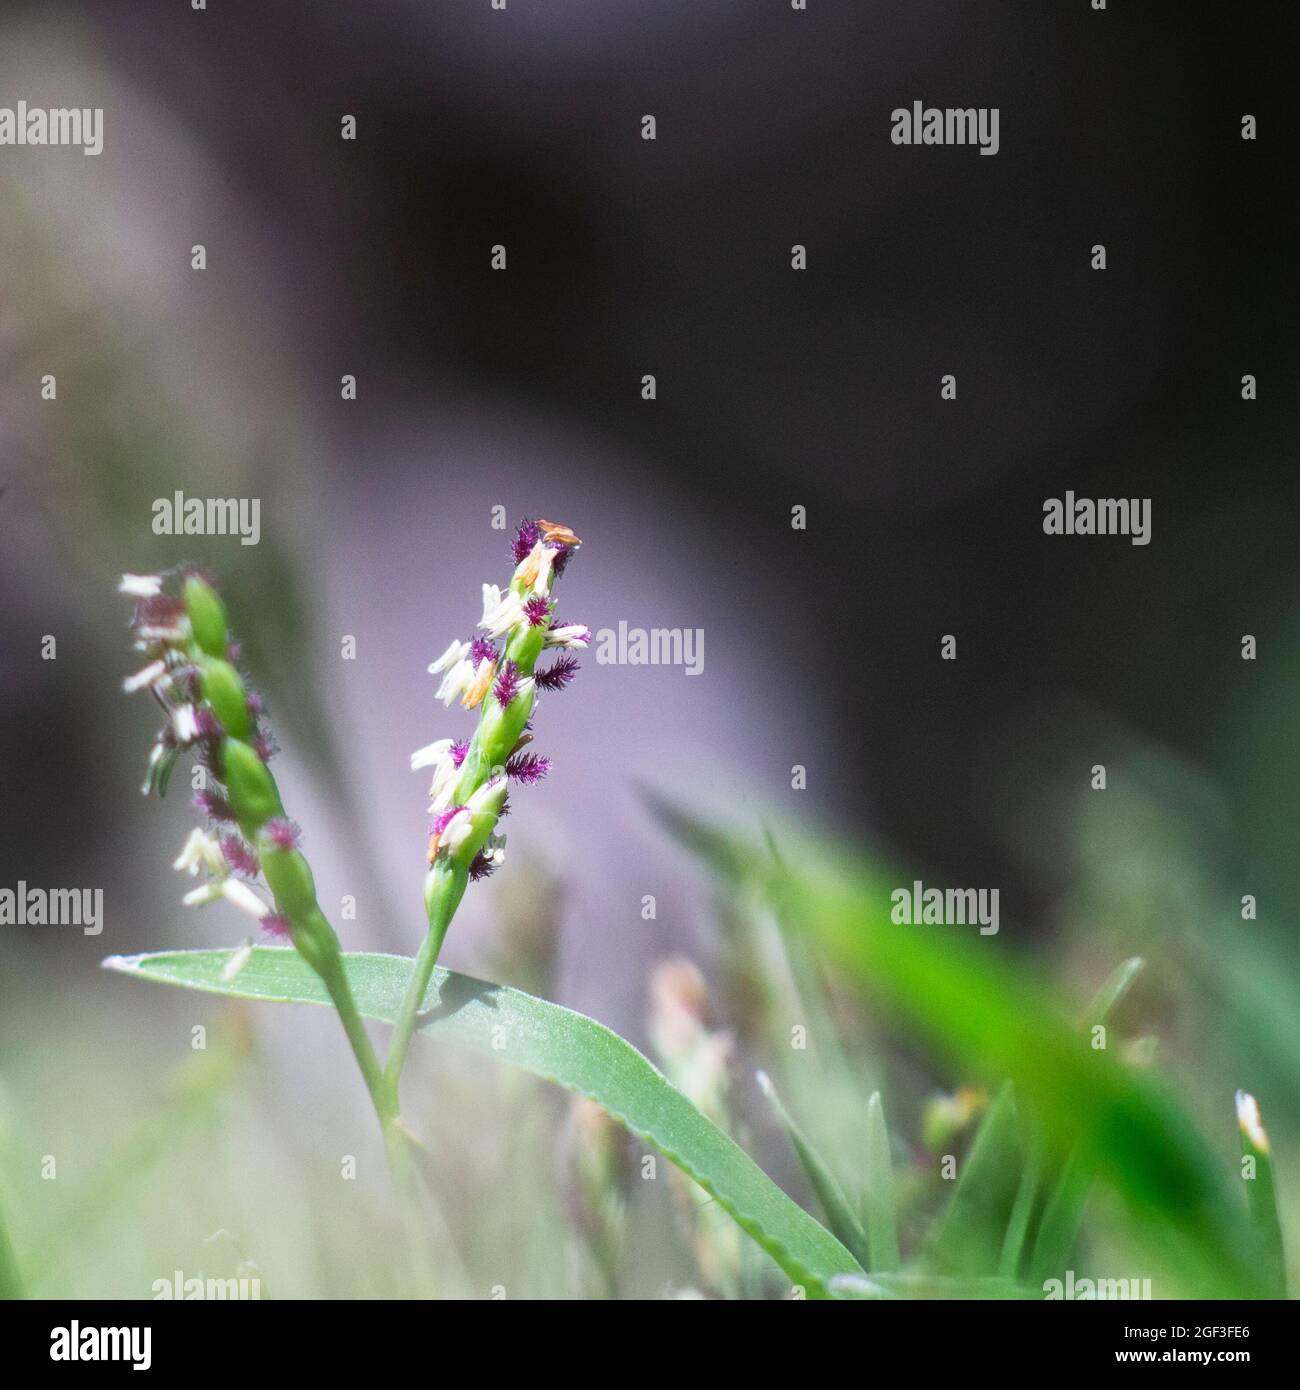 Macro image of tiny flowers of tury grass with cool background Stock Photo